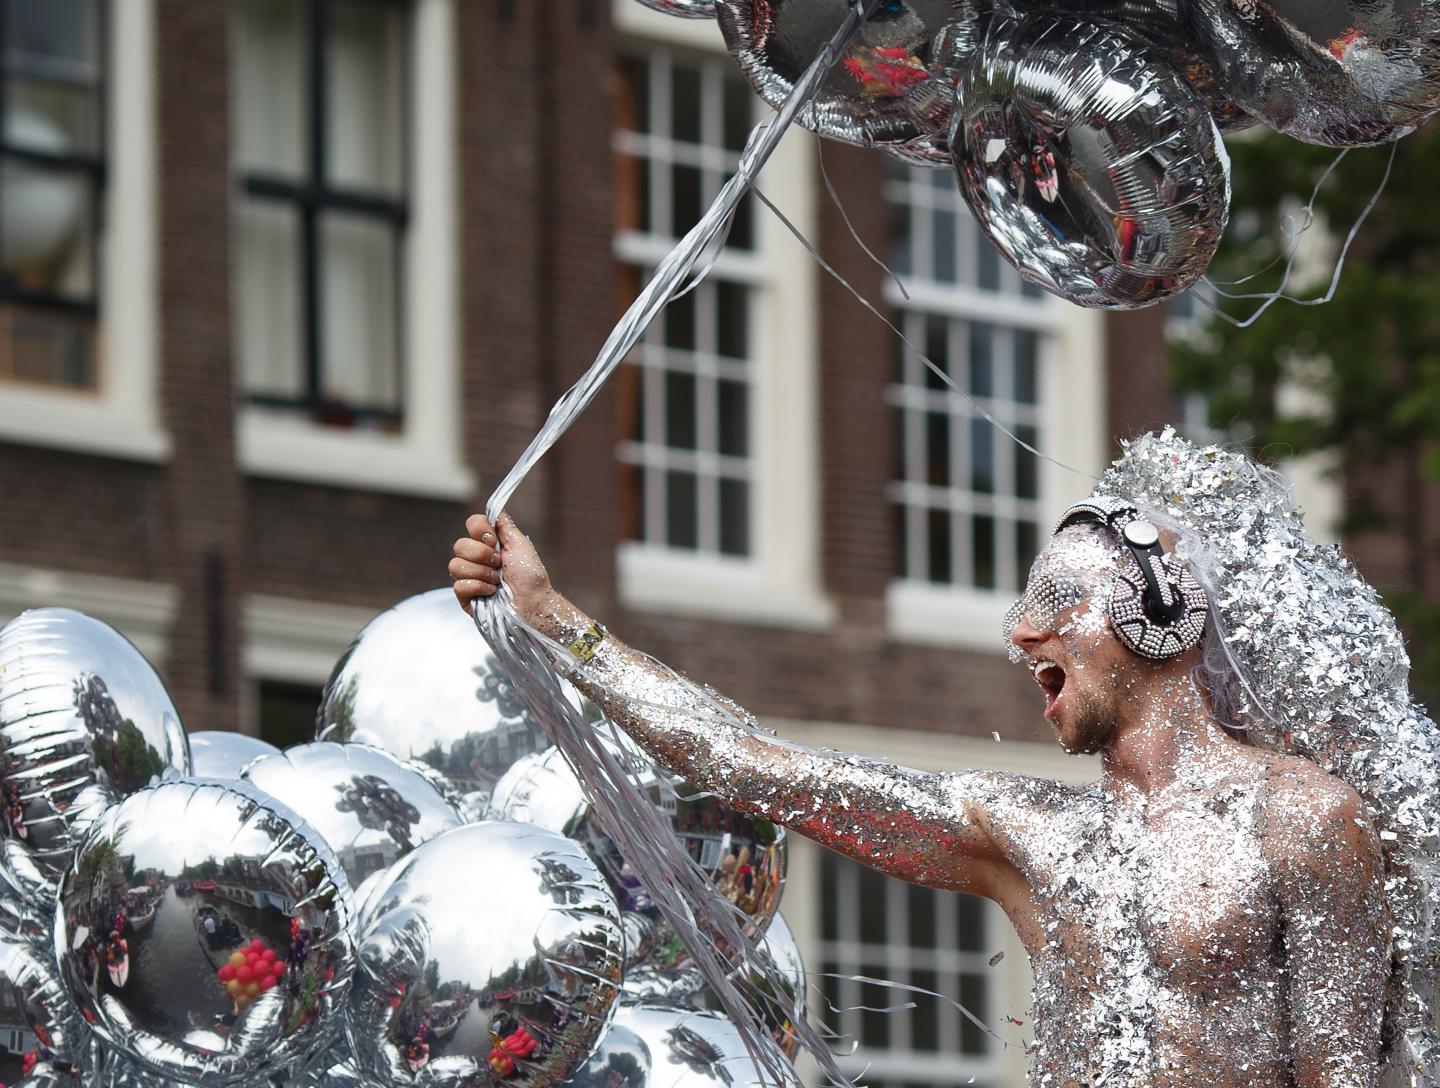 A shirtless man at a Pride parade covered in silver glitter